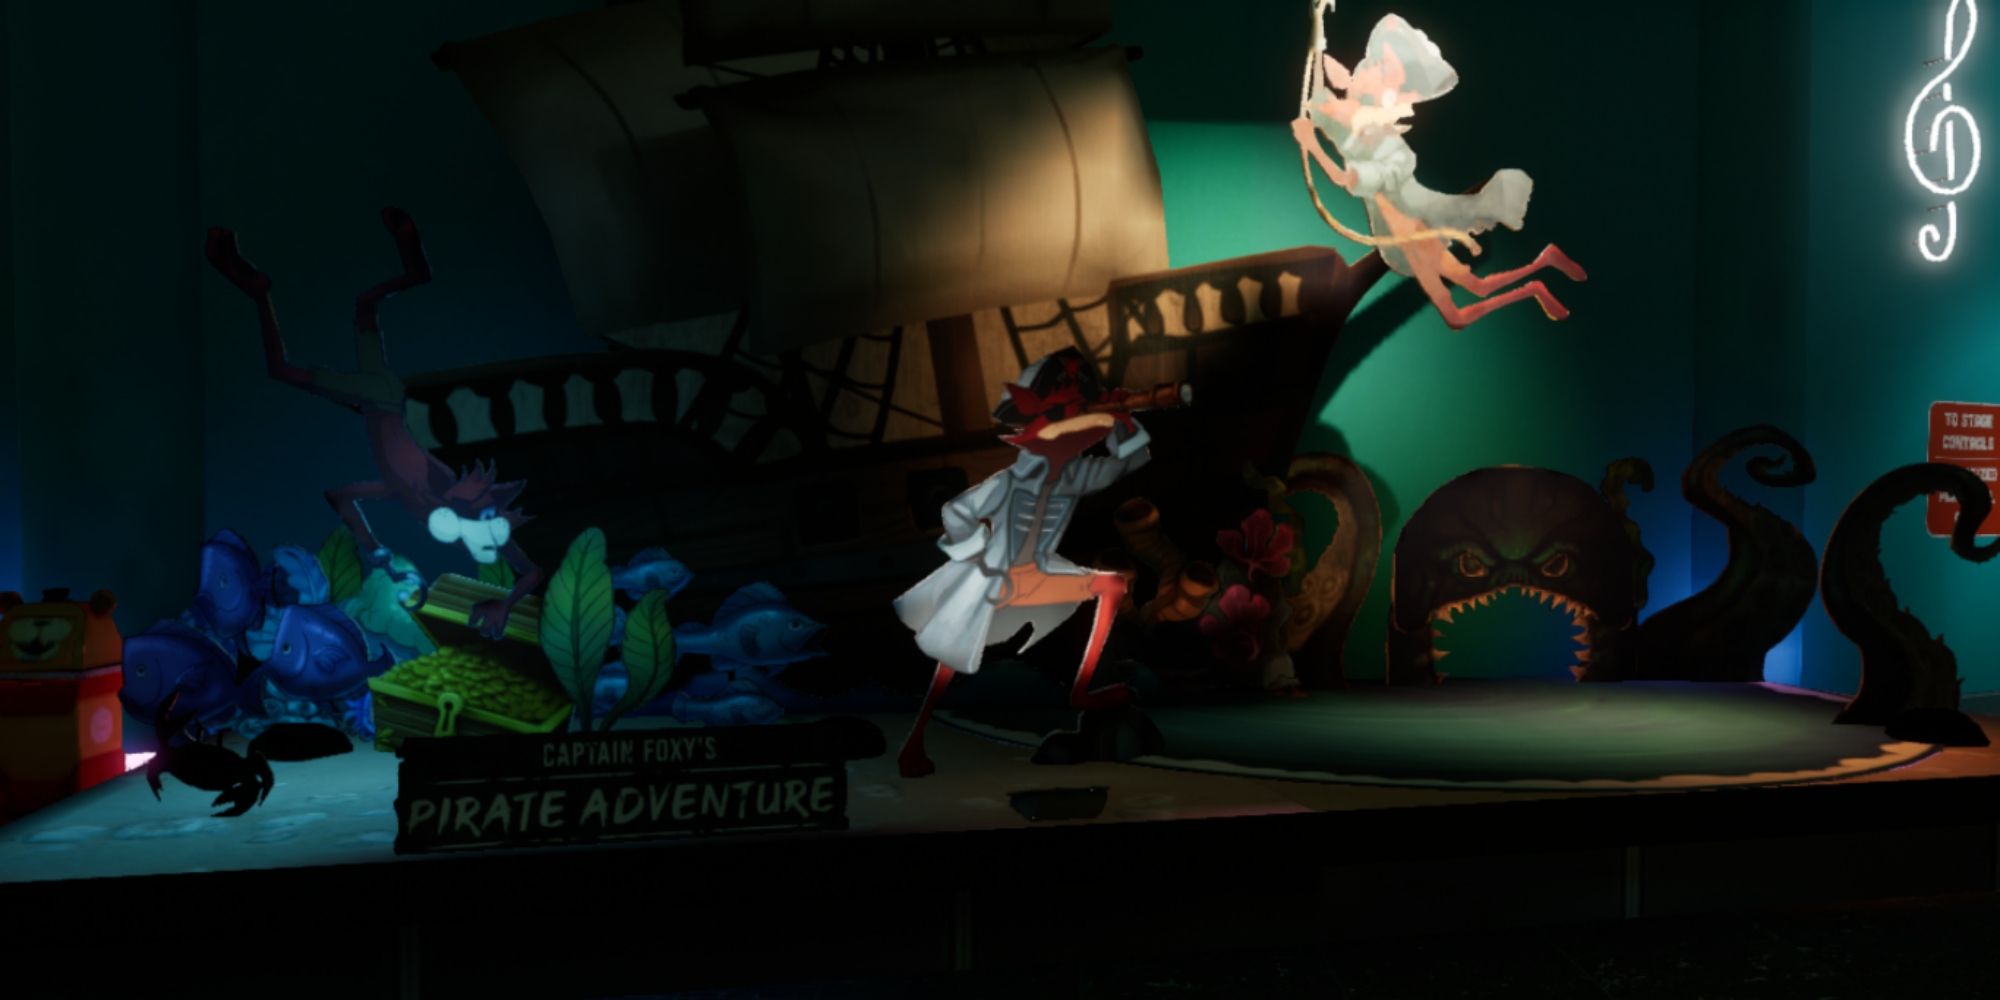 A display for Captain Foxy's Pirate Adventure including several different foxy cutouts and a large ship.